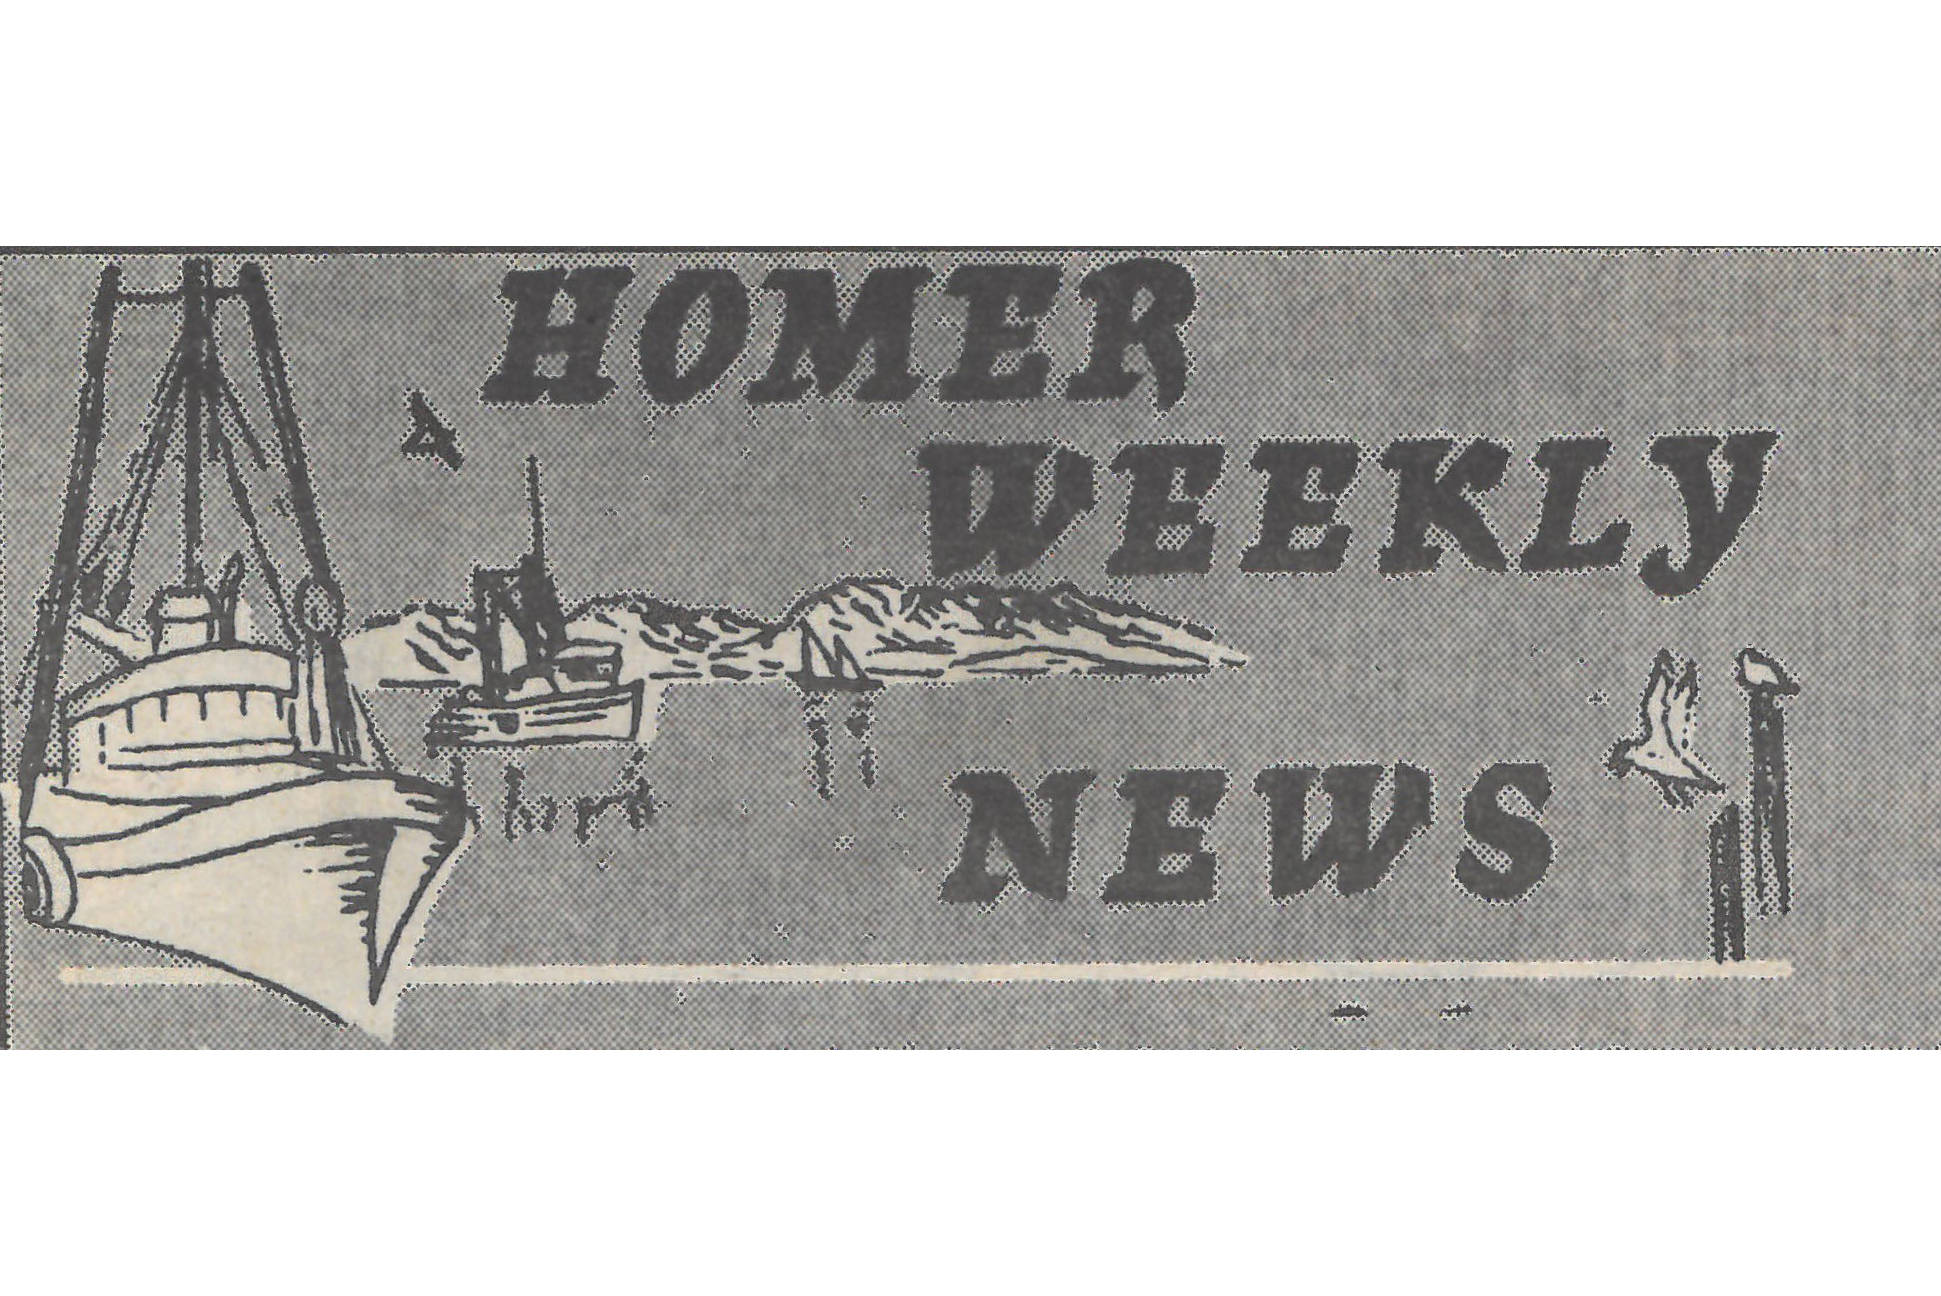 The masthead for the Homer Weekly News.